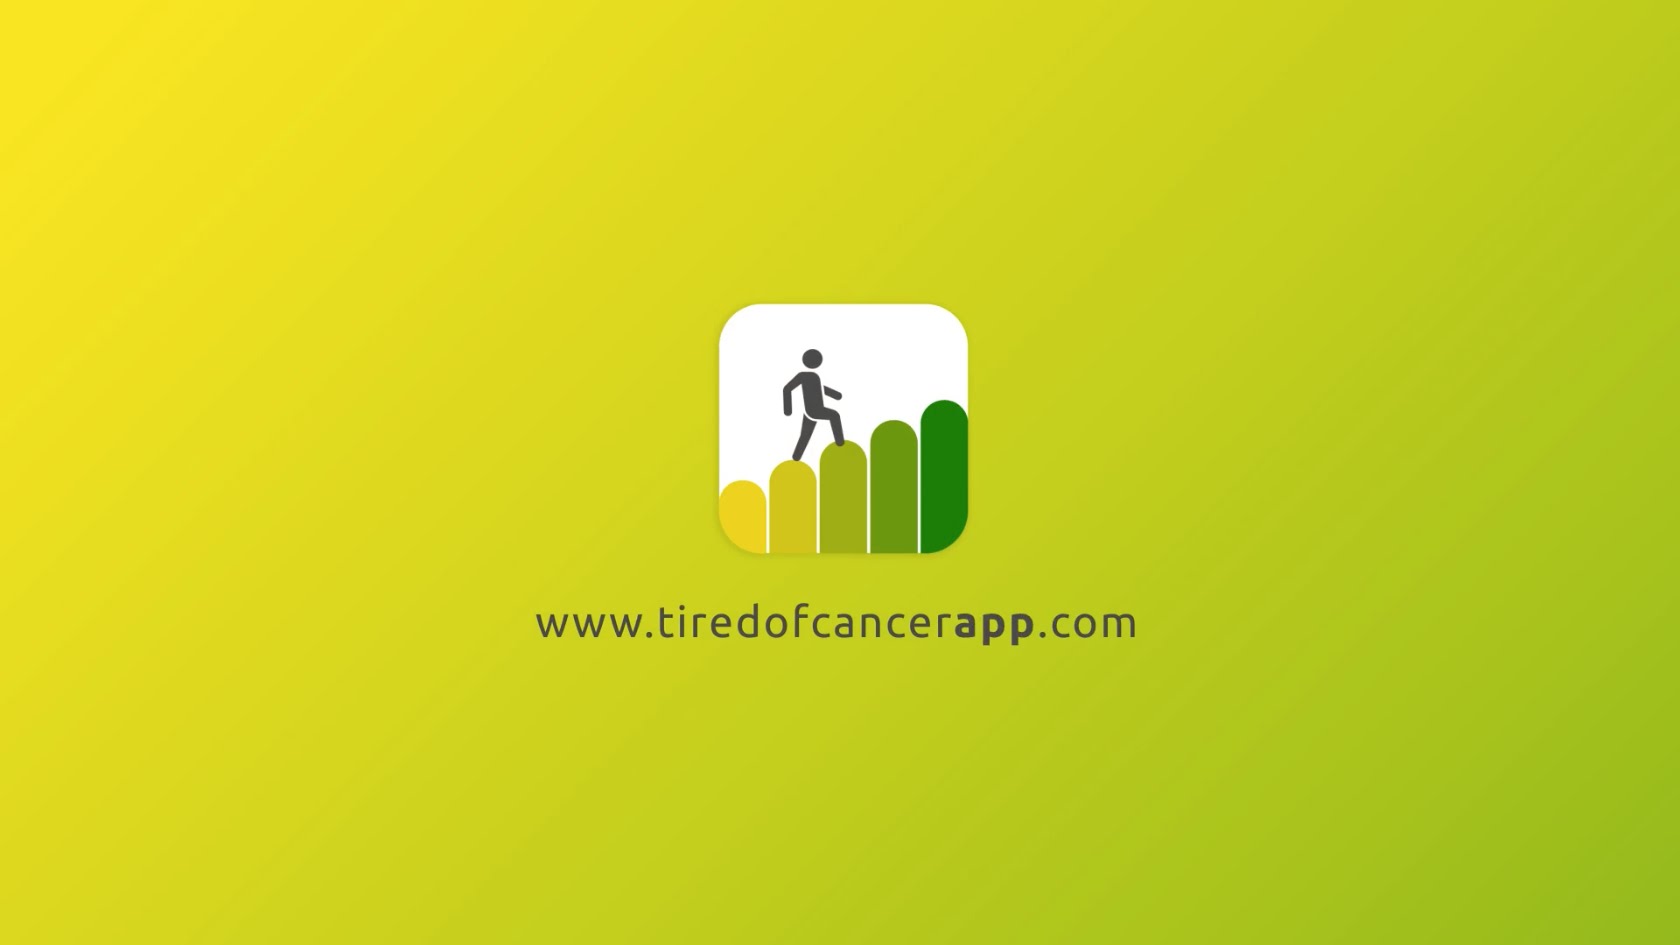 Tired of Cancer App